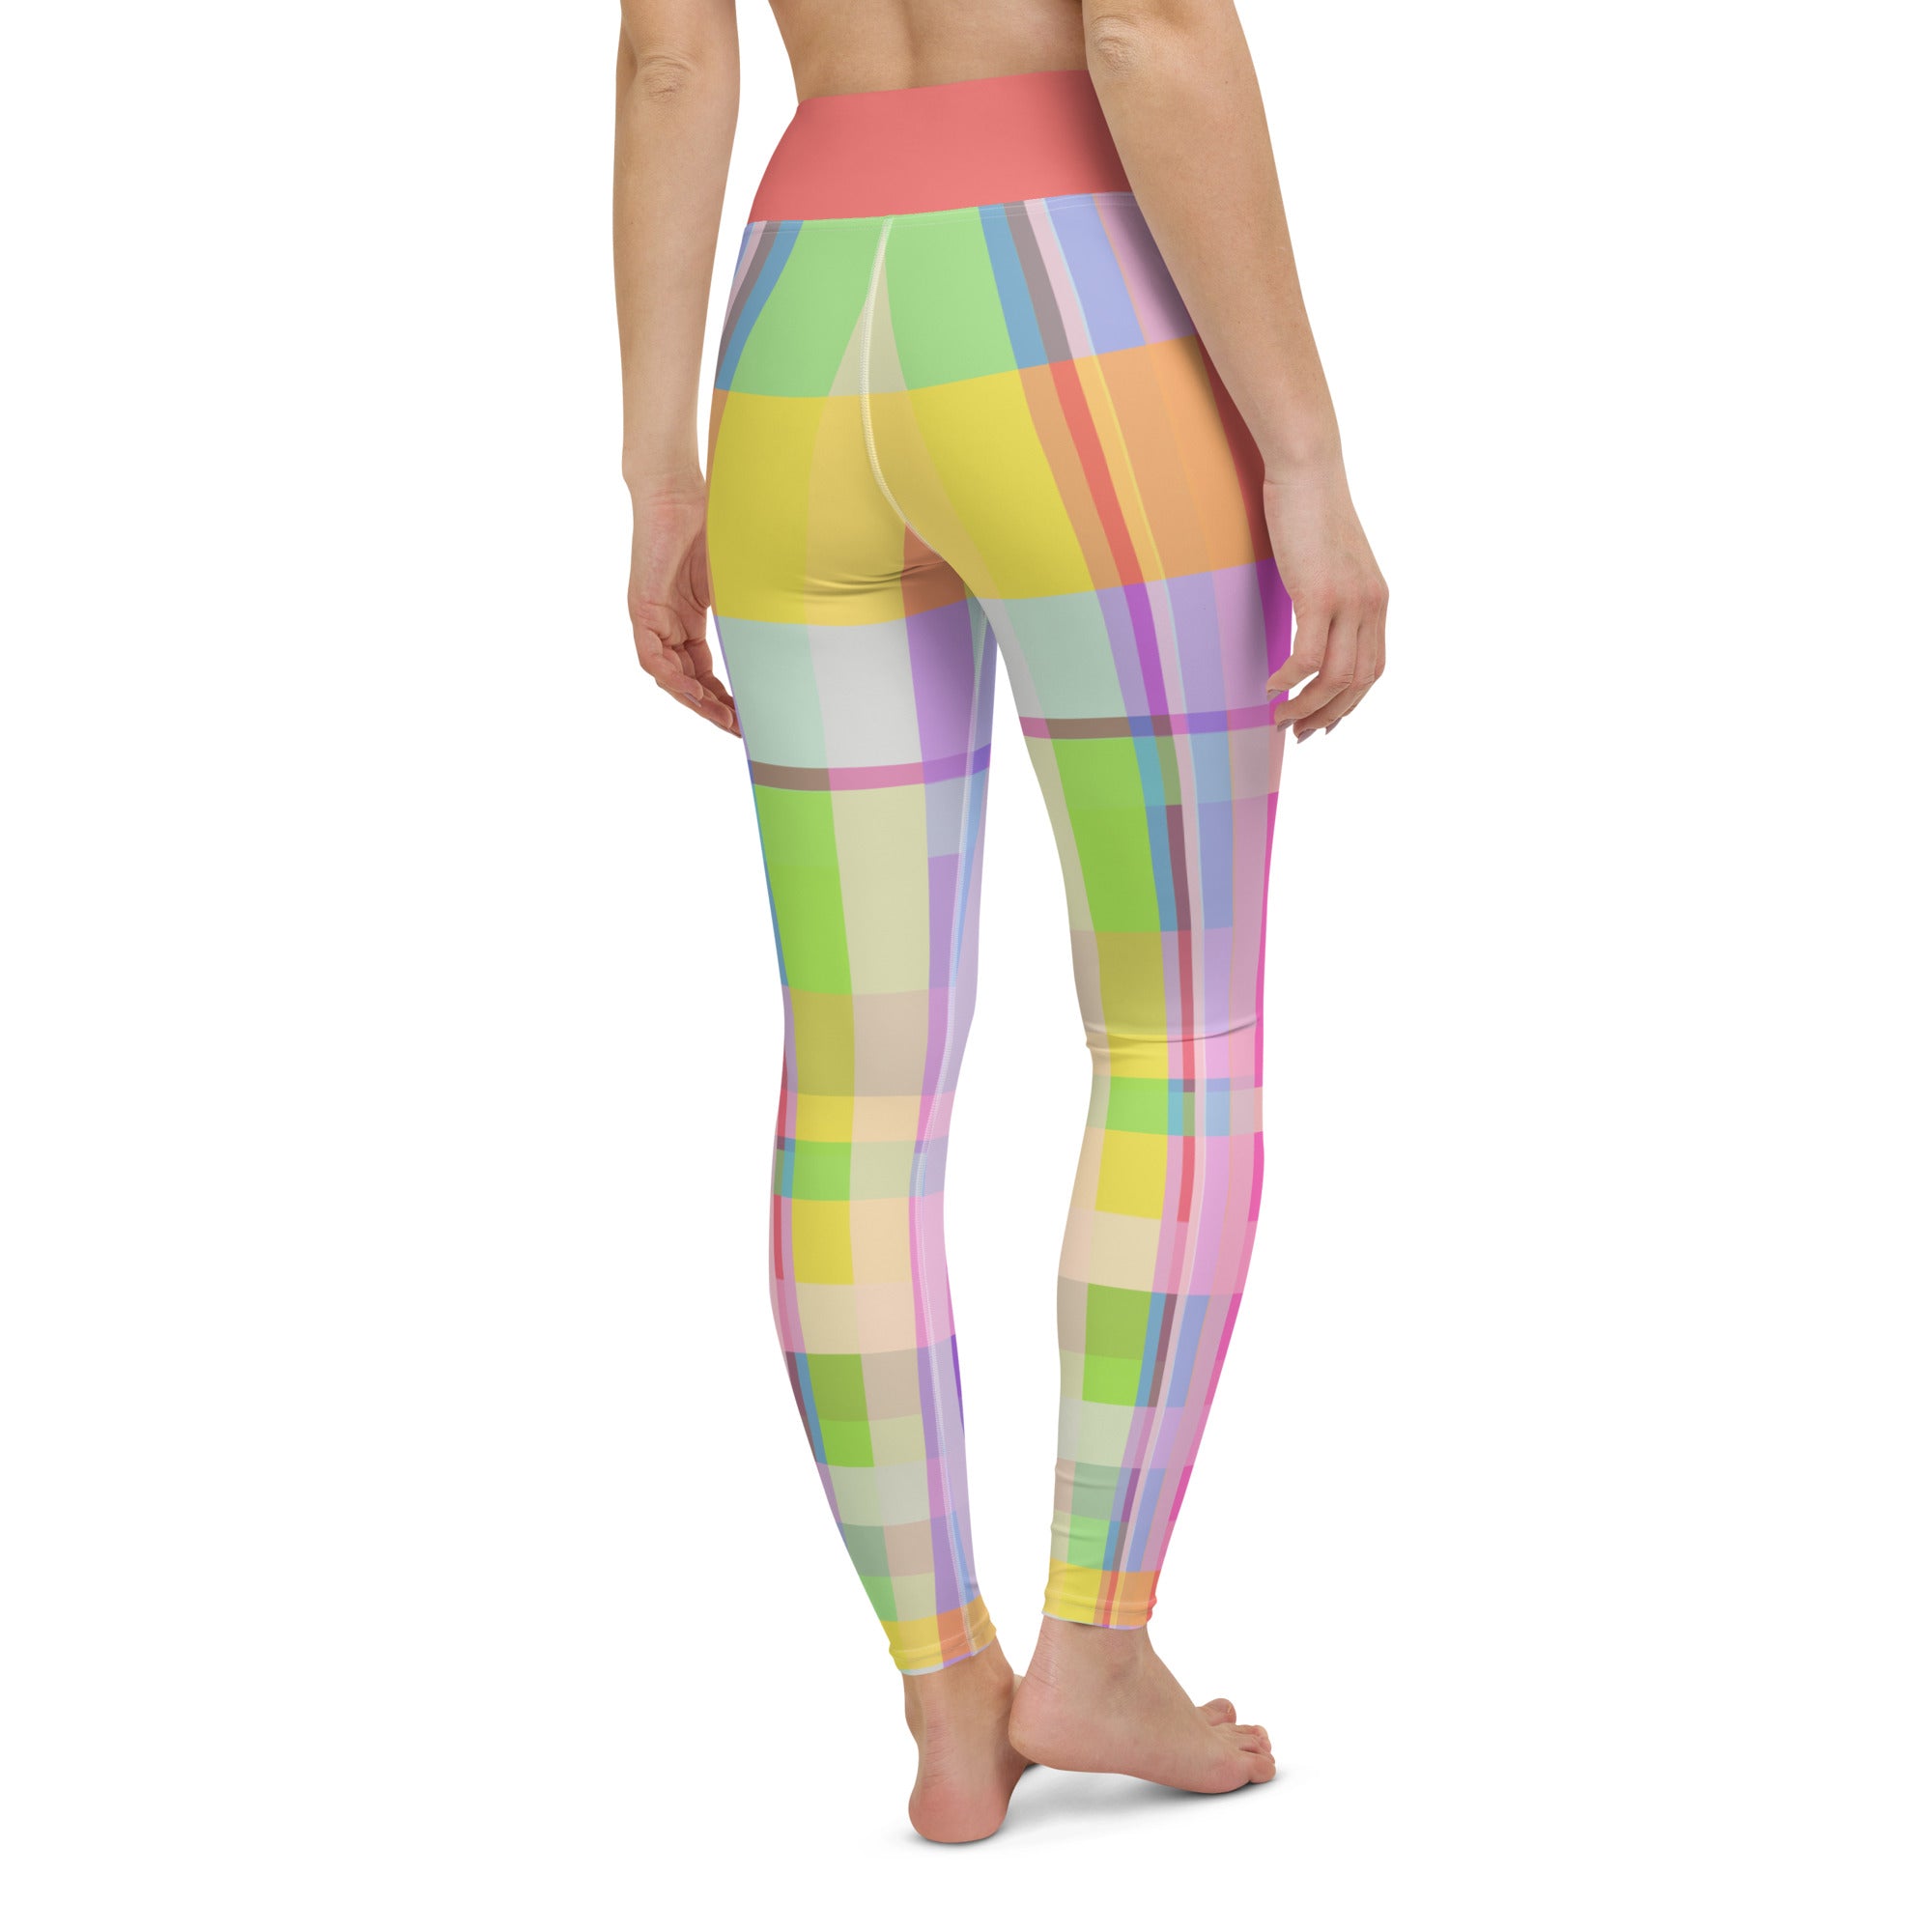 Dynamic and colorful leggings with a unique geometric maze design, inspiring creativity in your workouts.